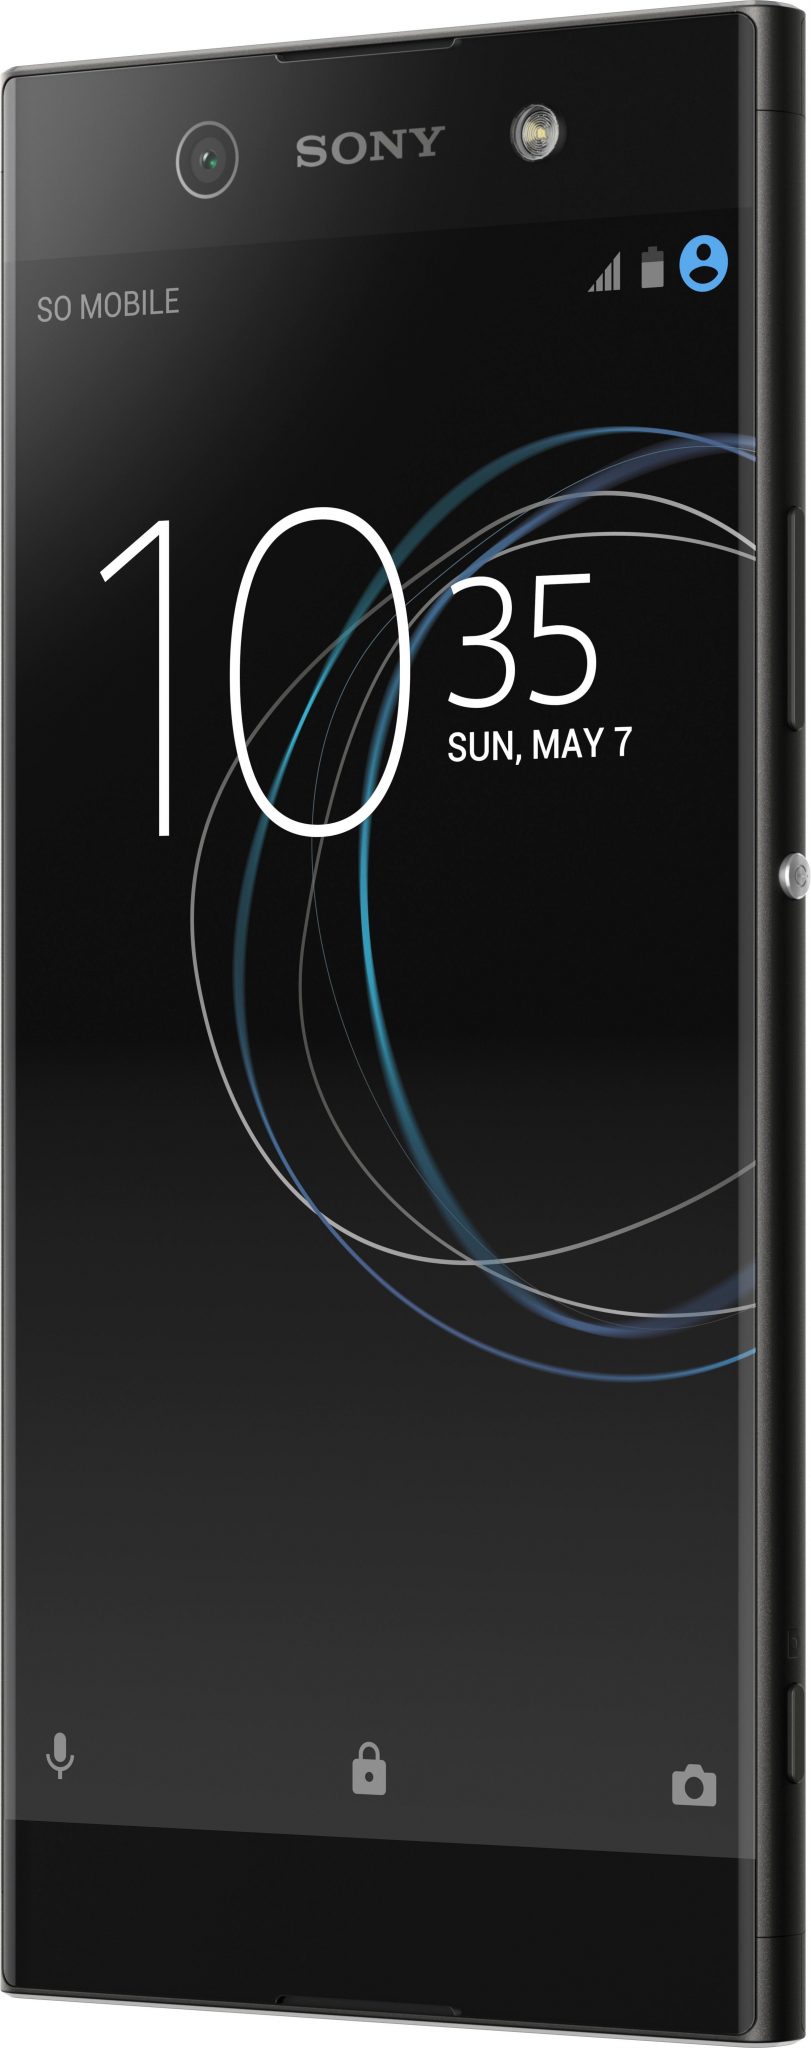 New Sony Unlocked Mobile Phones Available At Best Buy